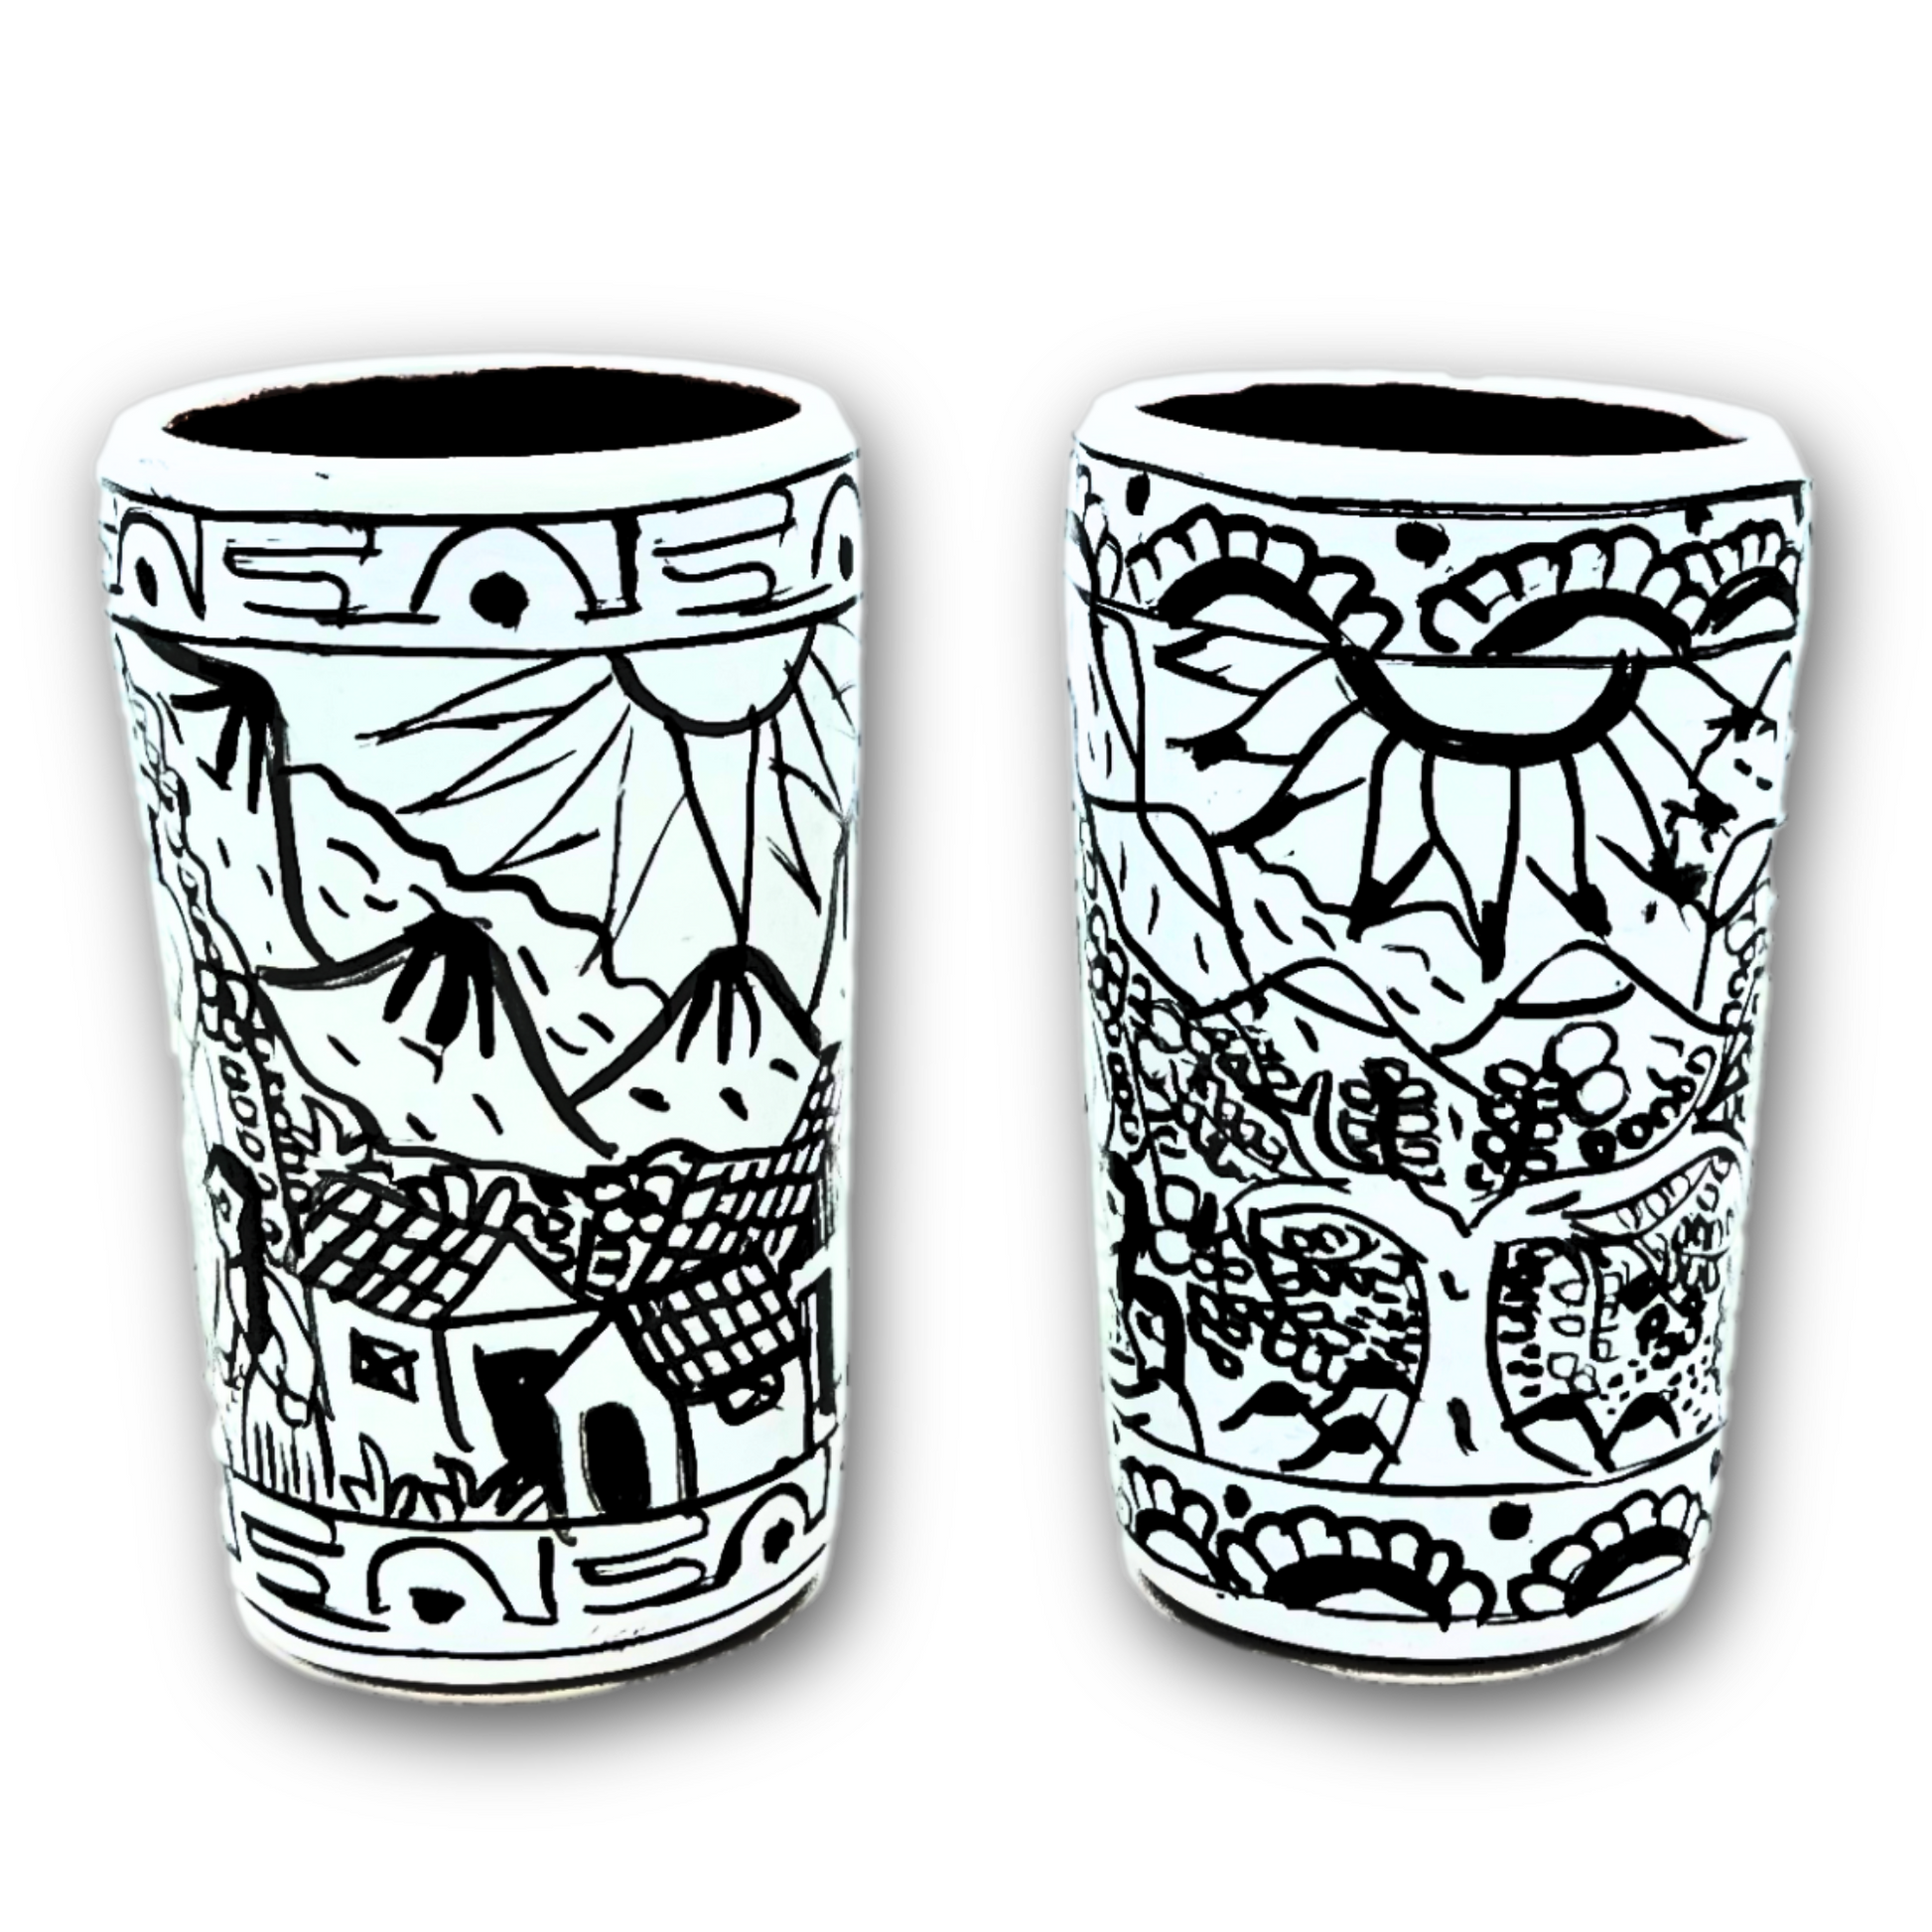 White ceramic shot glasses, individually hand-painted in Mexico, ideal for tequila, mezcal, or other spirits, pack of 2.